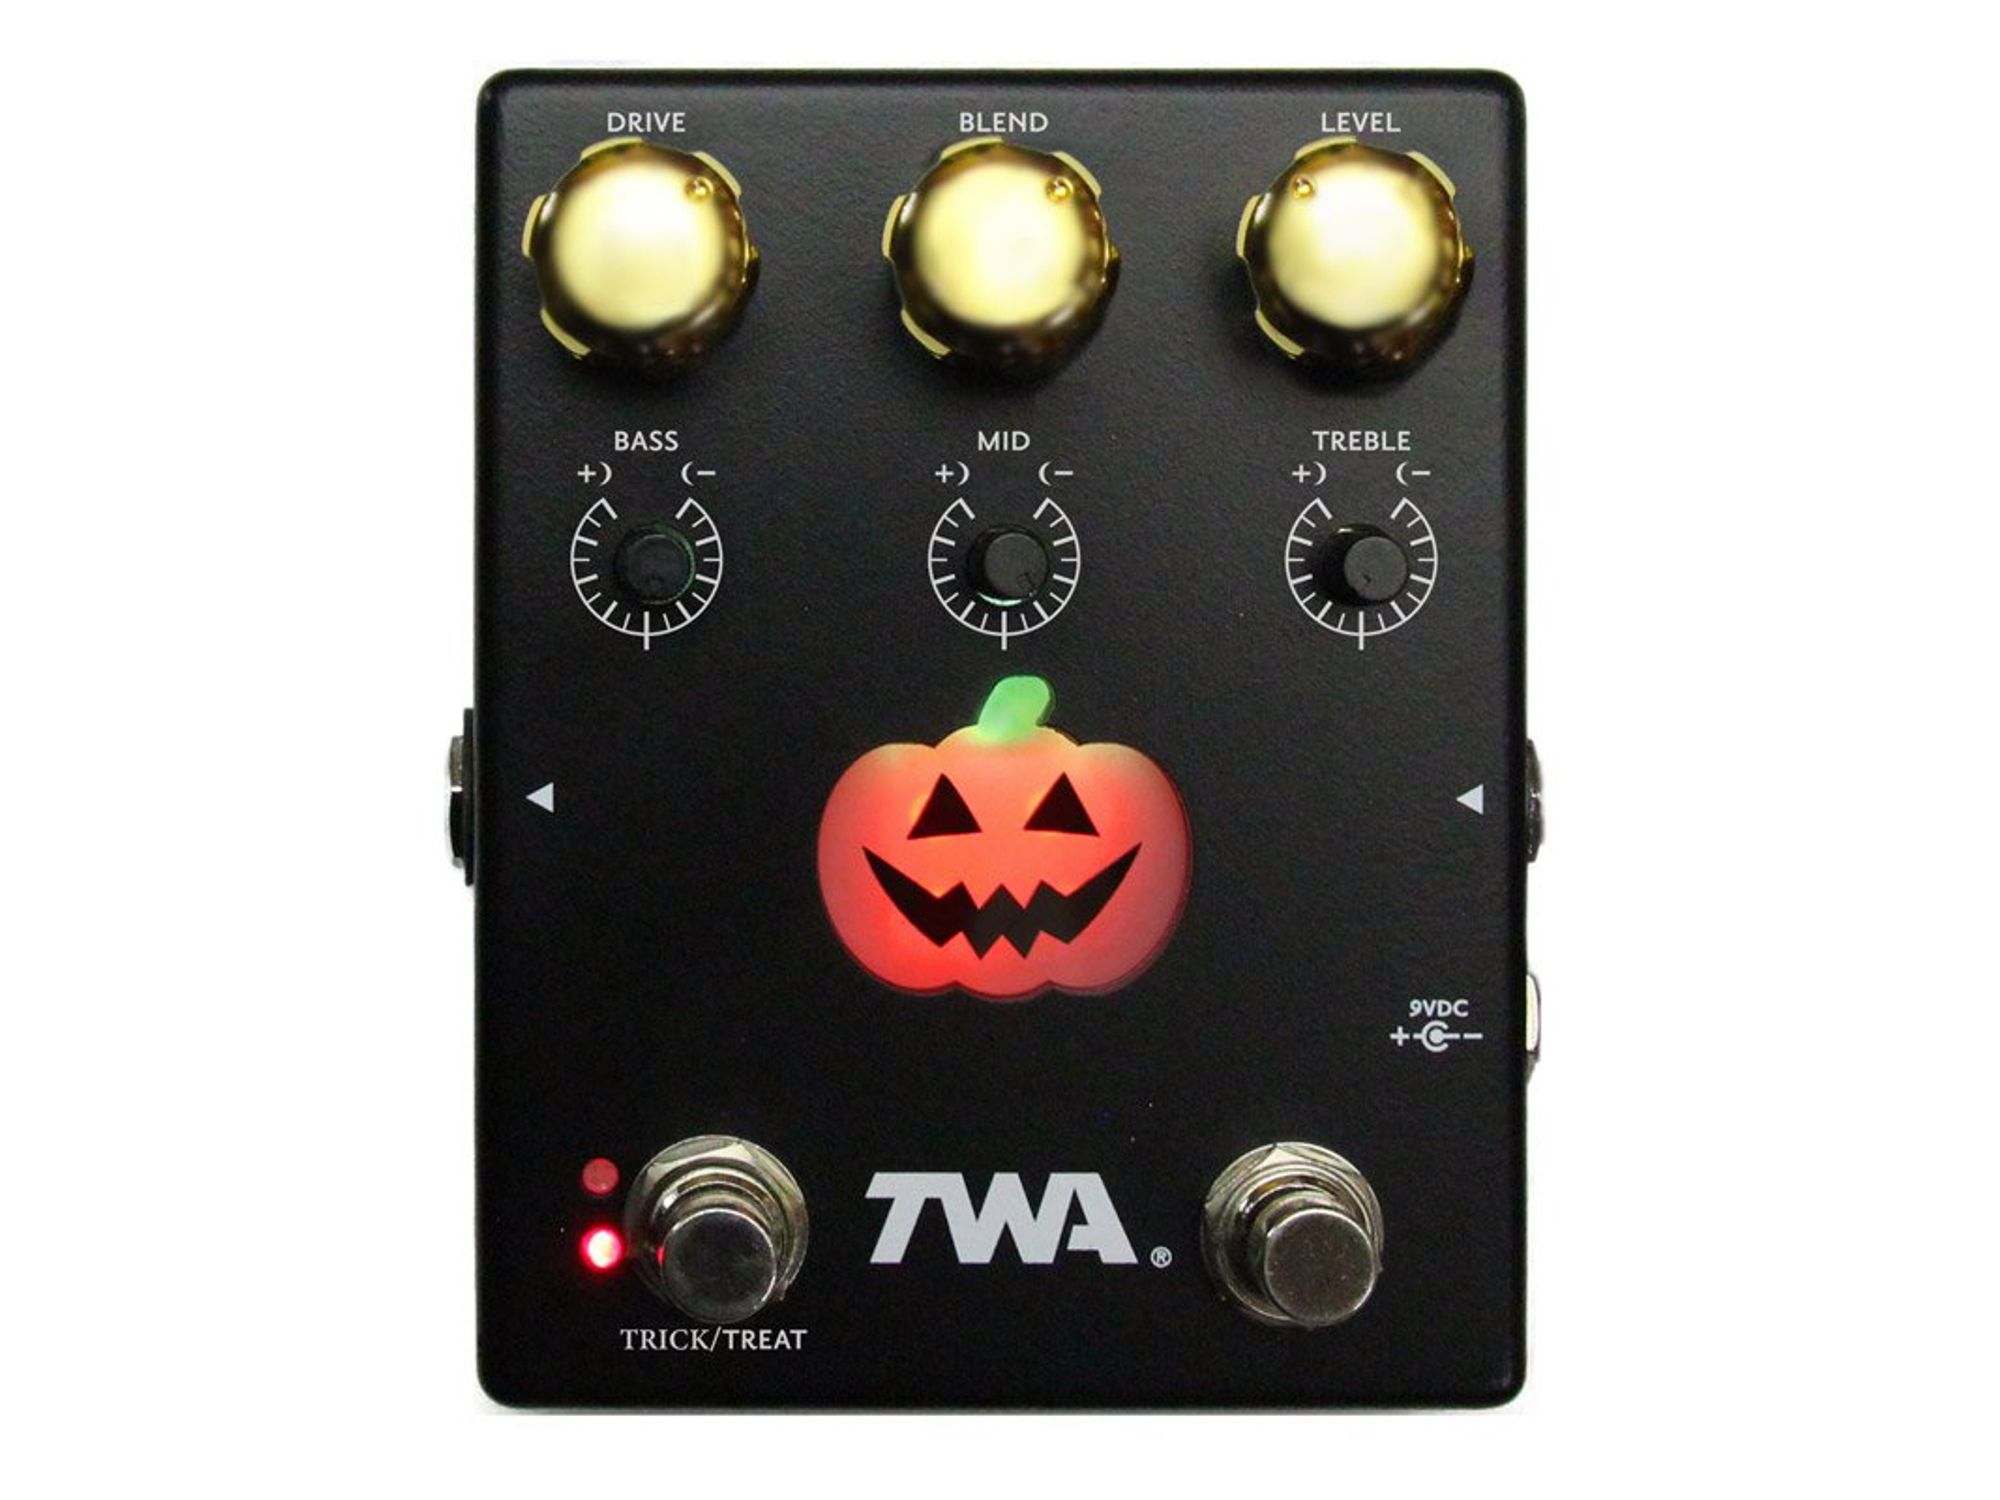 TWA Releases the Octoverdrive Overdrive/Octavia